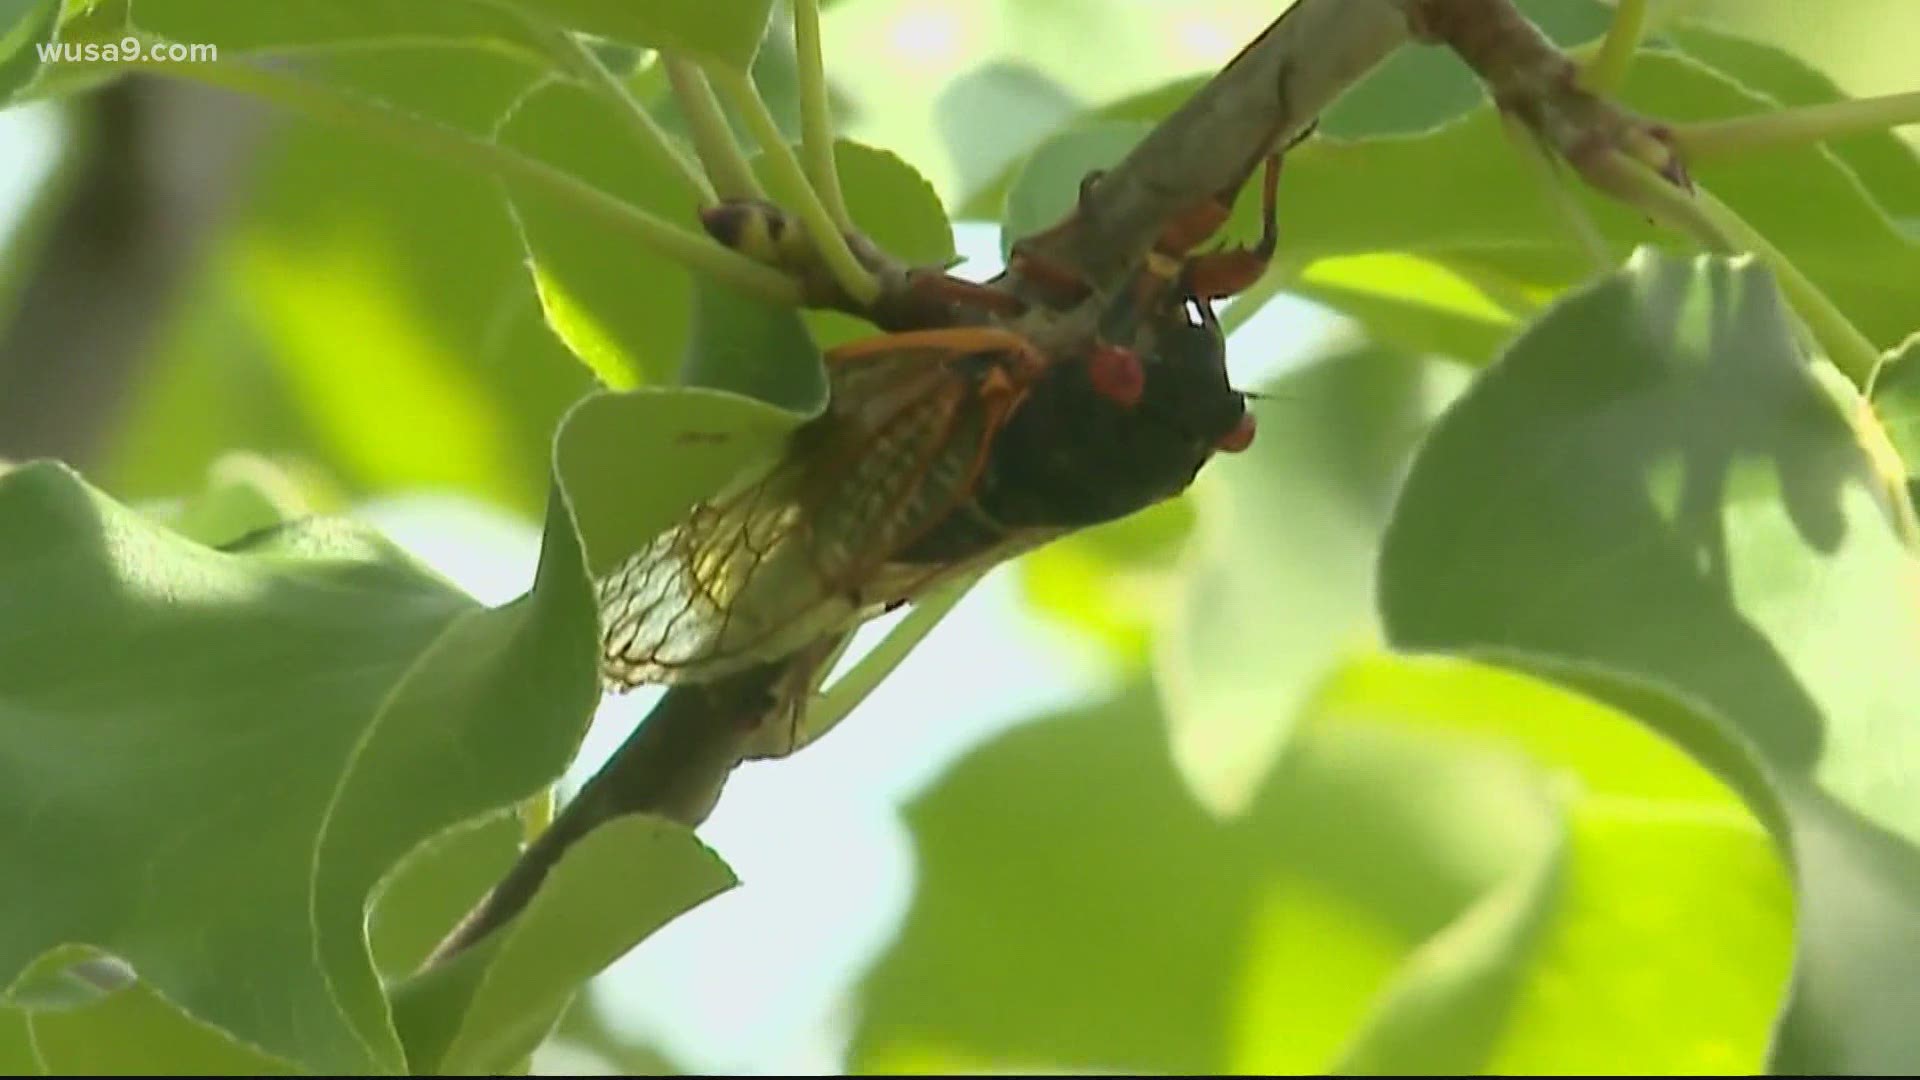 Chief Meteorologist, Topper Shutt believes that cicadas do get louder in warmer weather. He also answers if hordes of them are showing up on radar